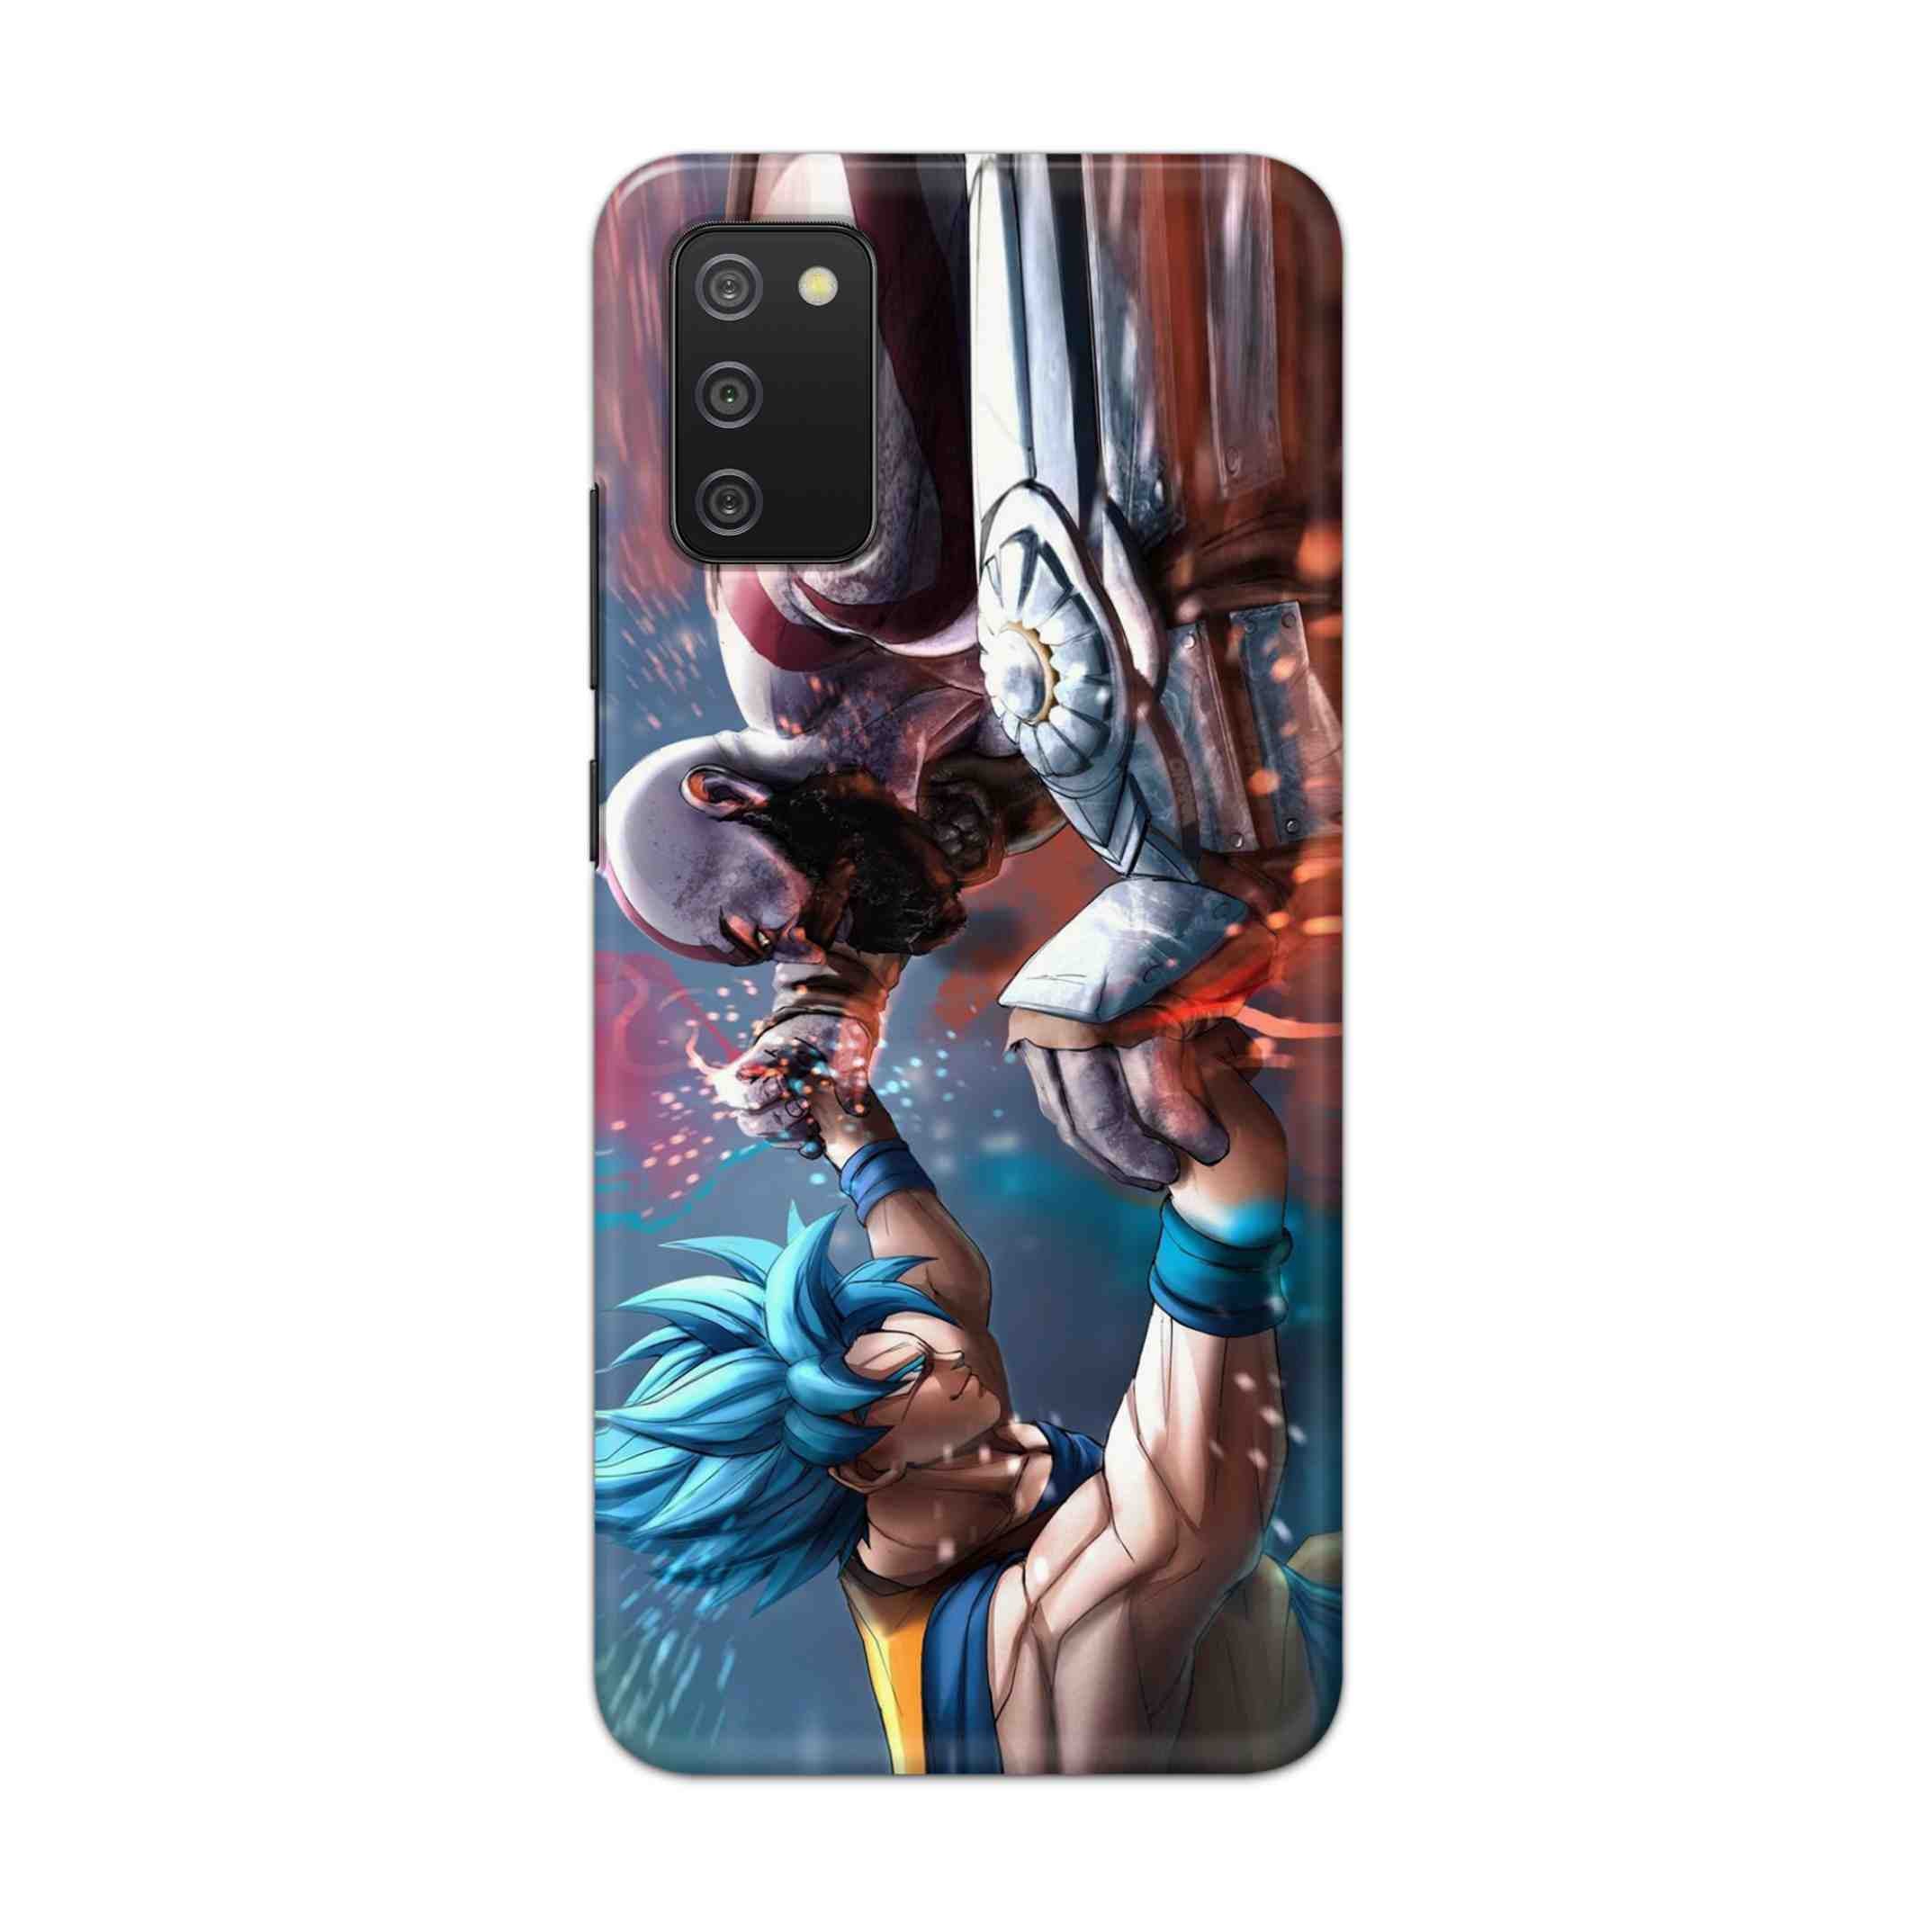 Buy Goku Vs Kratos Hard Back Mobile Phone Case Cover For Samsung Galaxy M02s Online